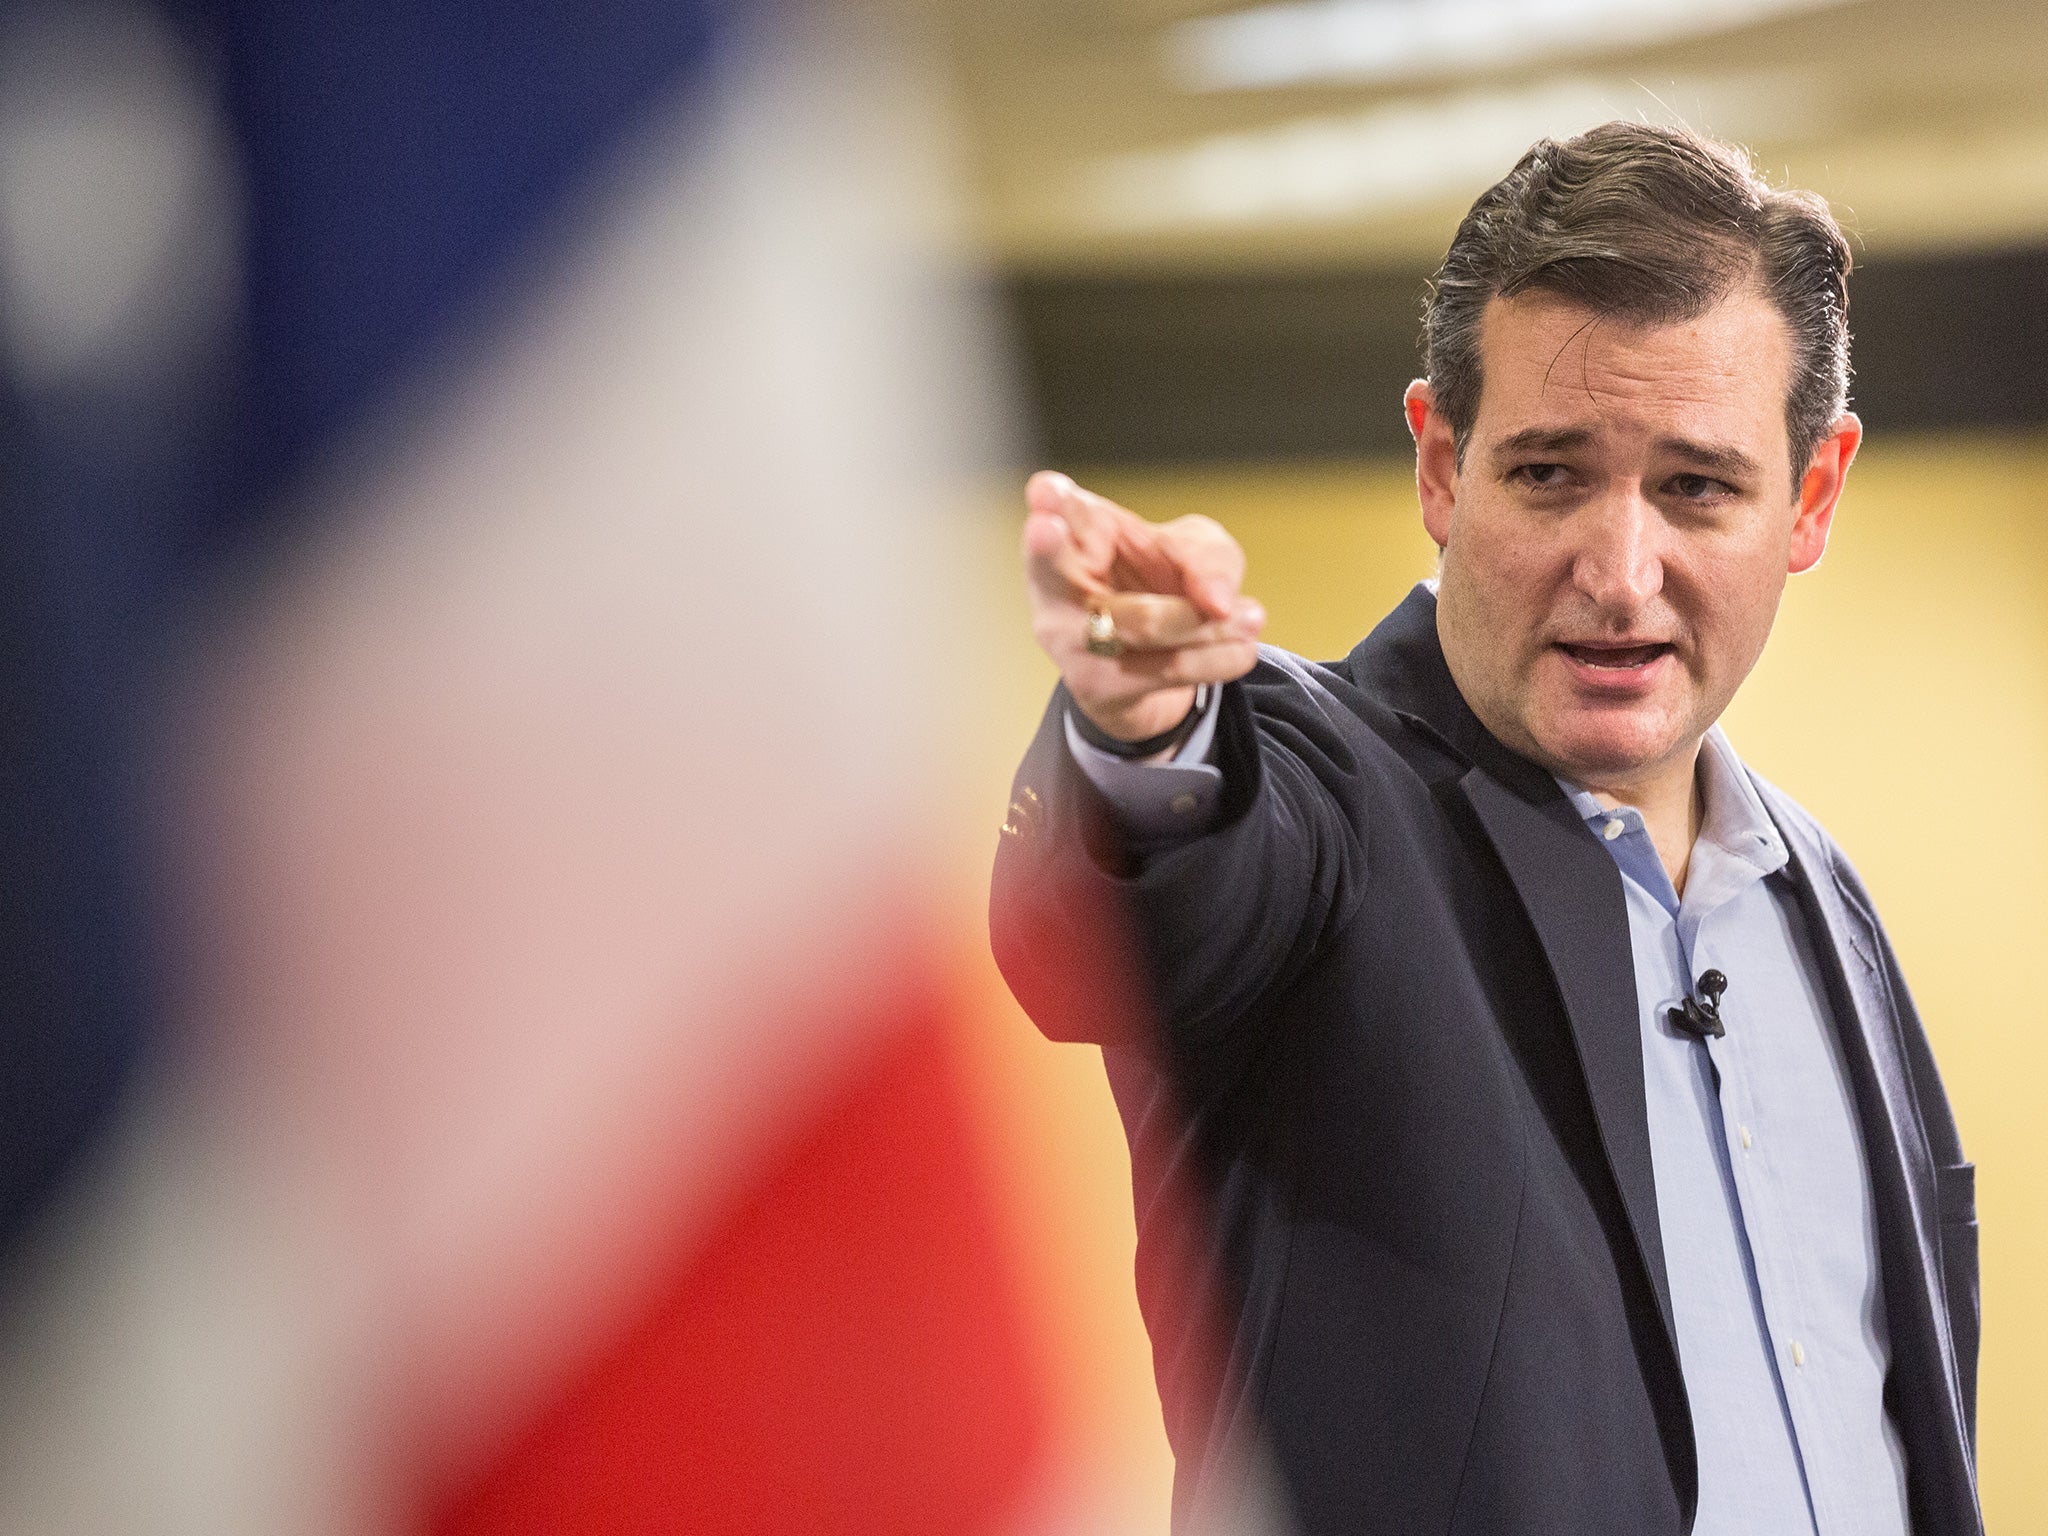 Ted Cruz will go head to head with his rival candidates in the Republican debate